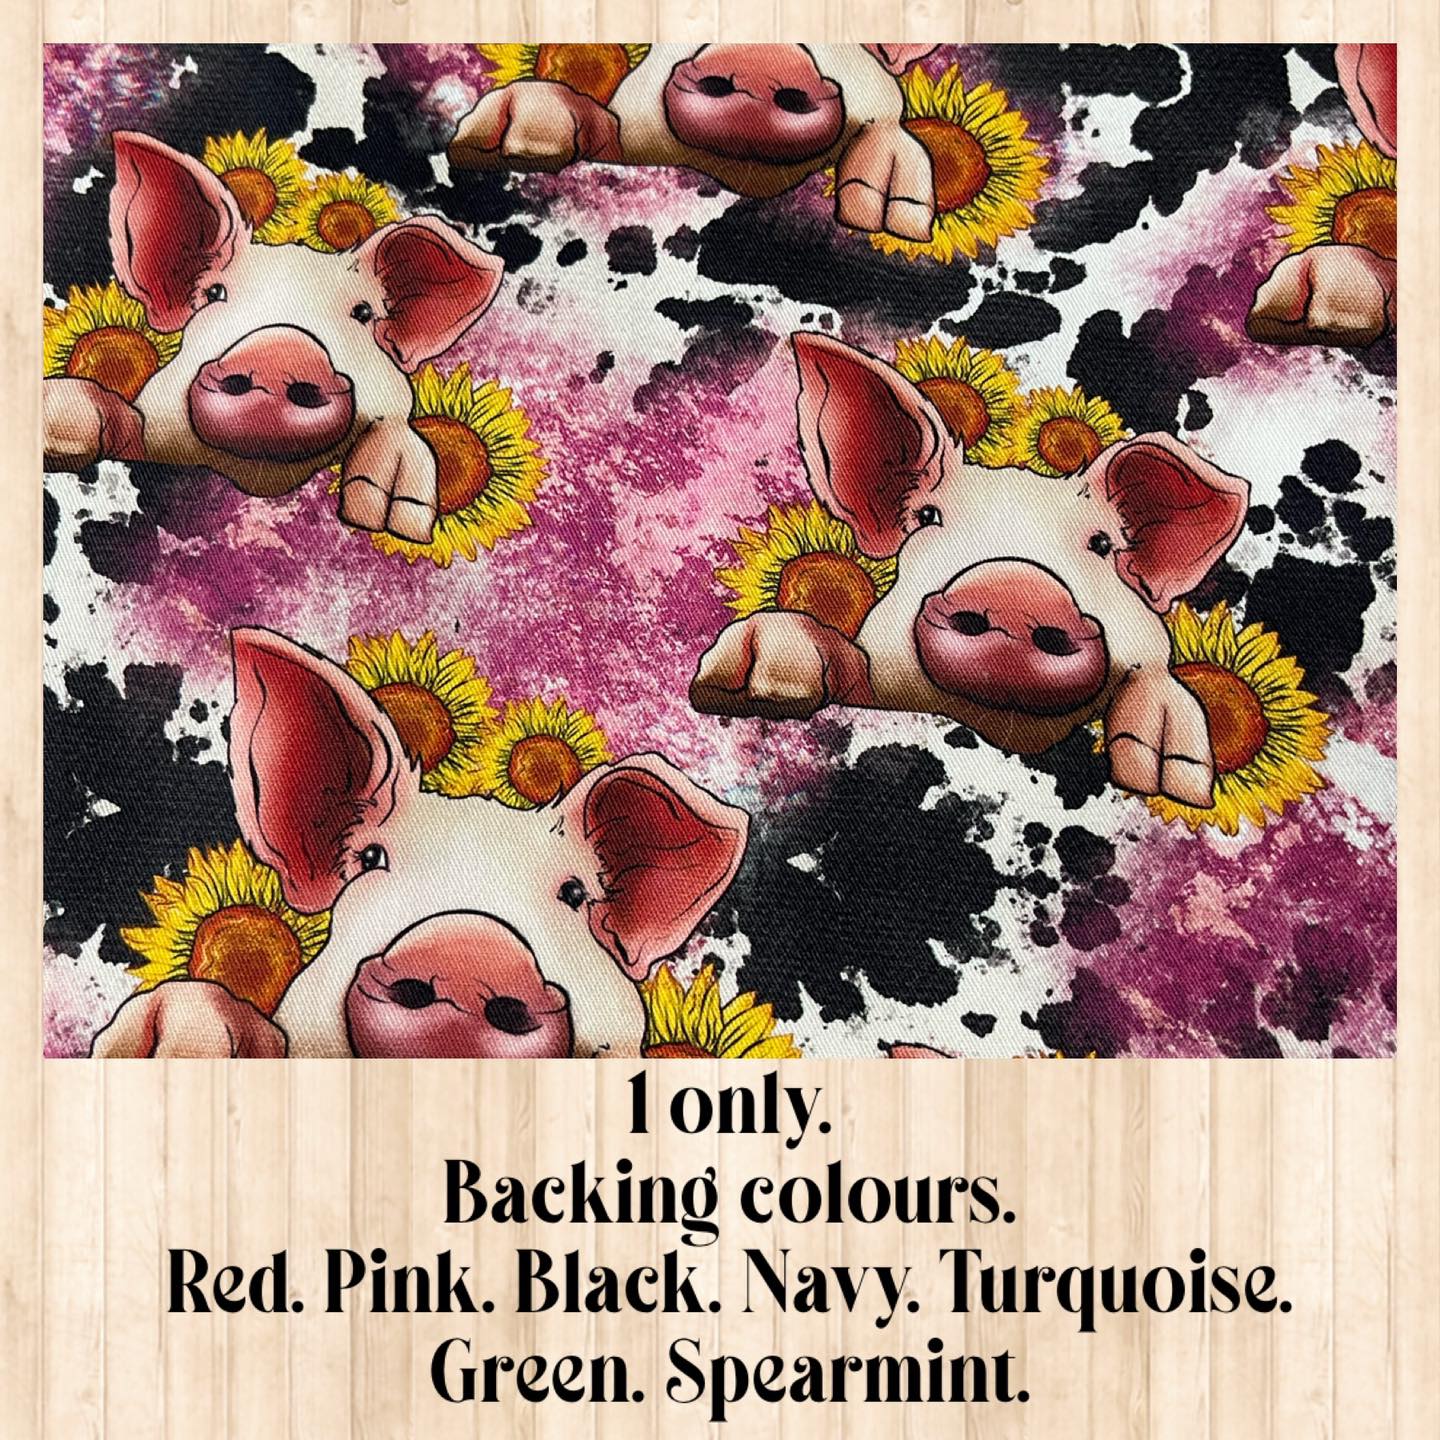 Clearance Swag Blanket - Pigs